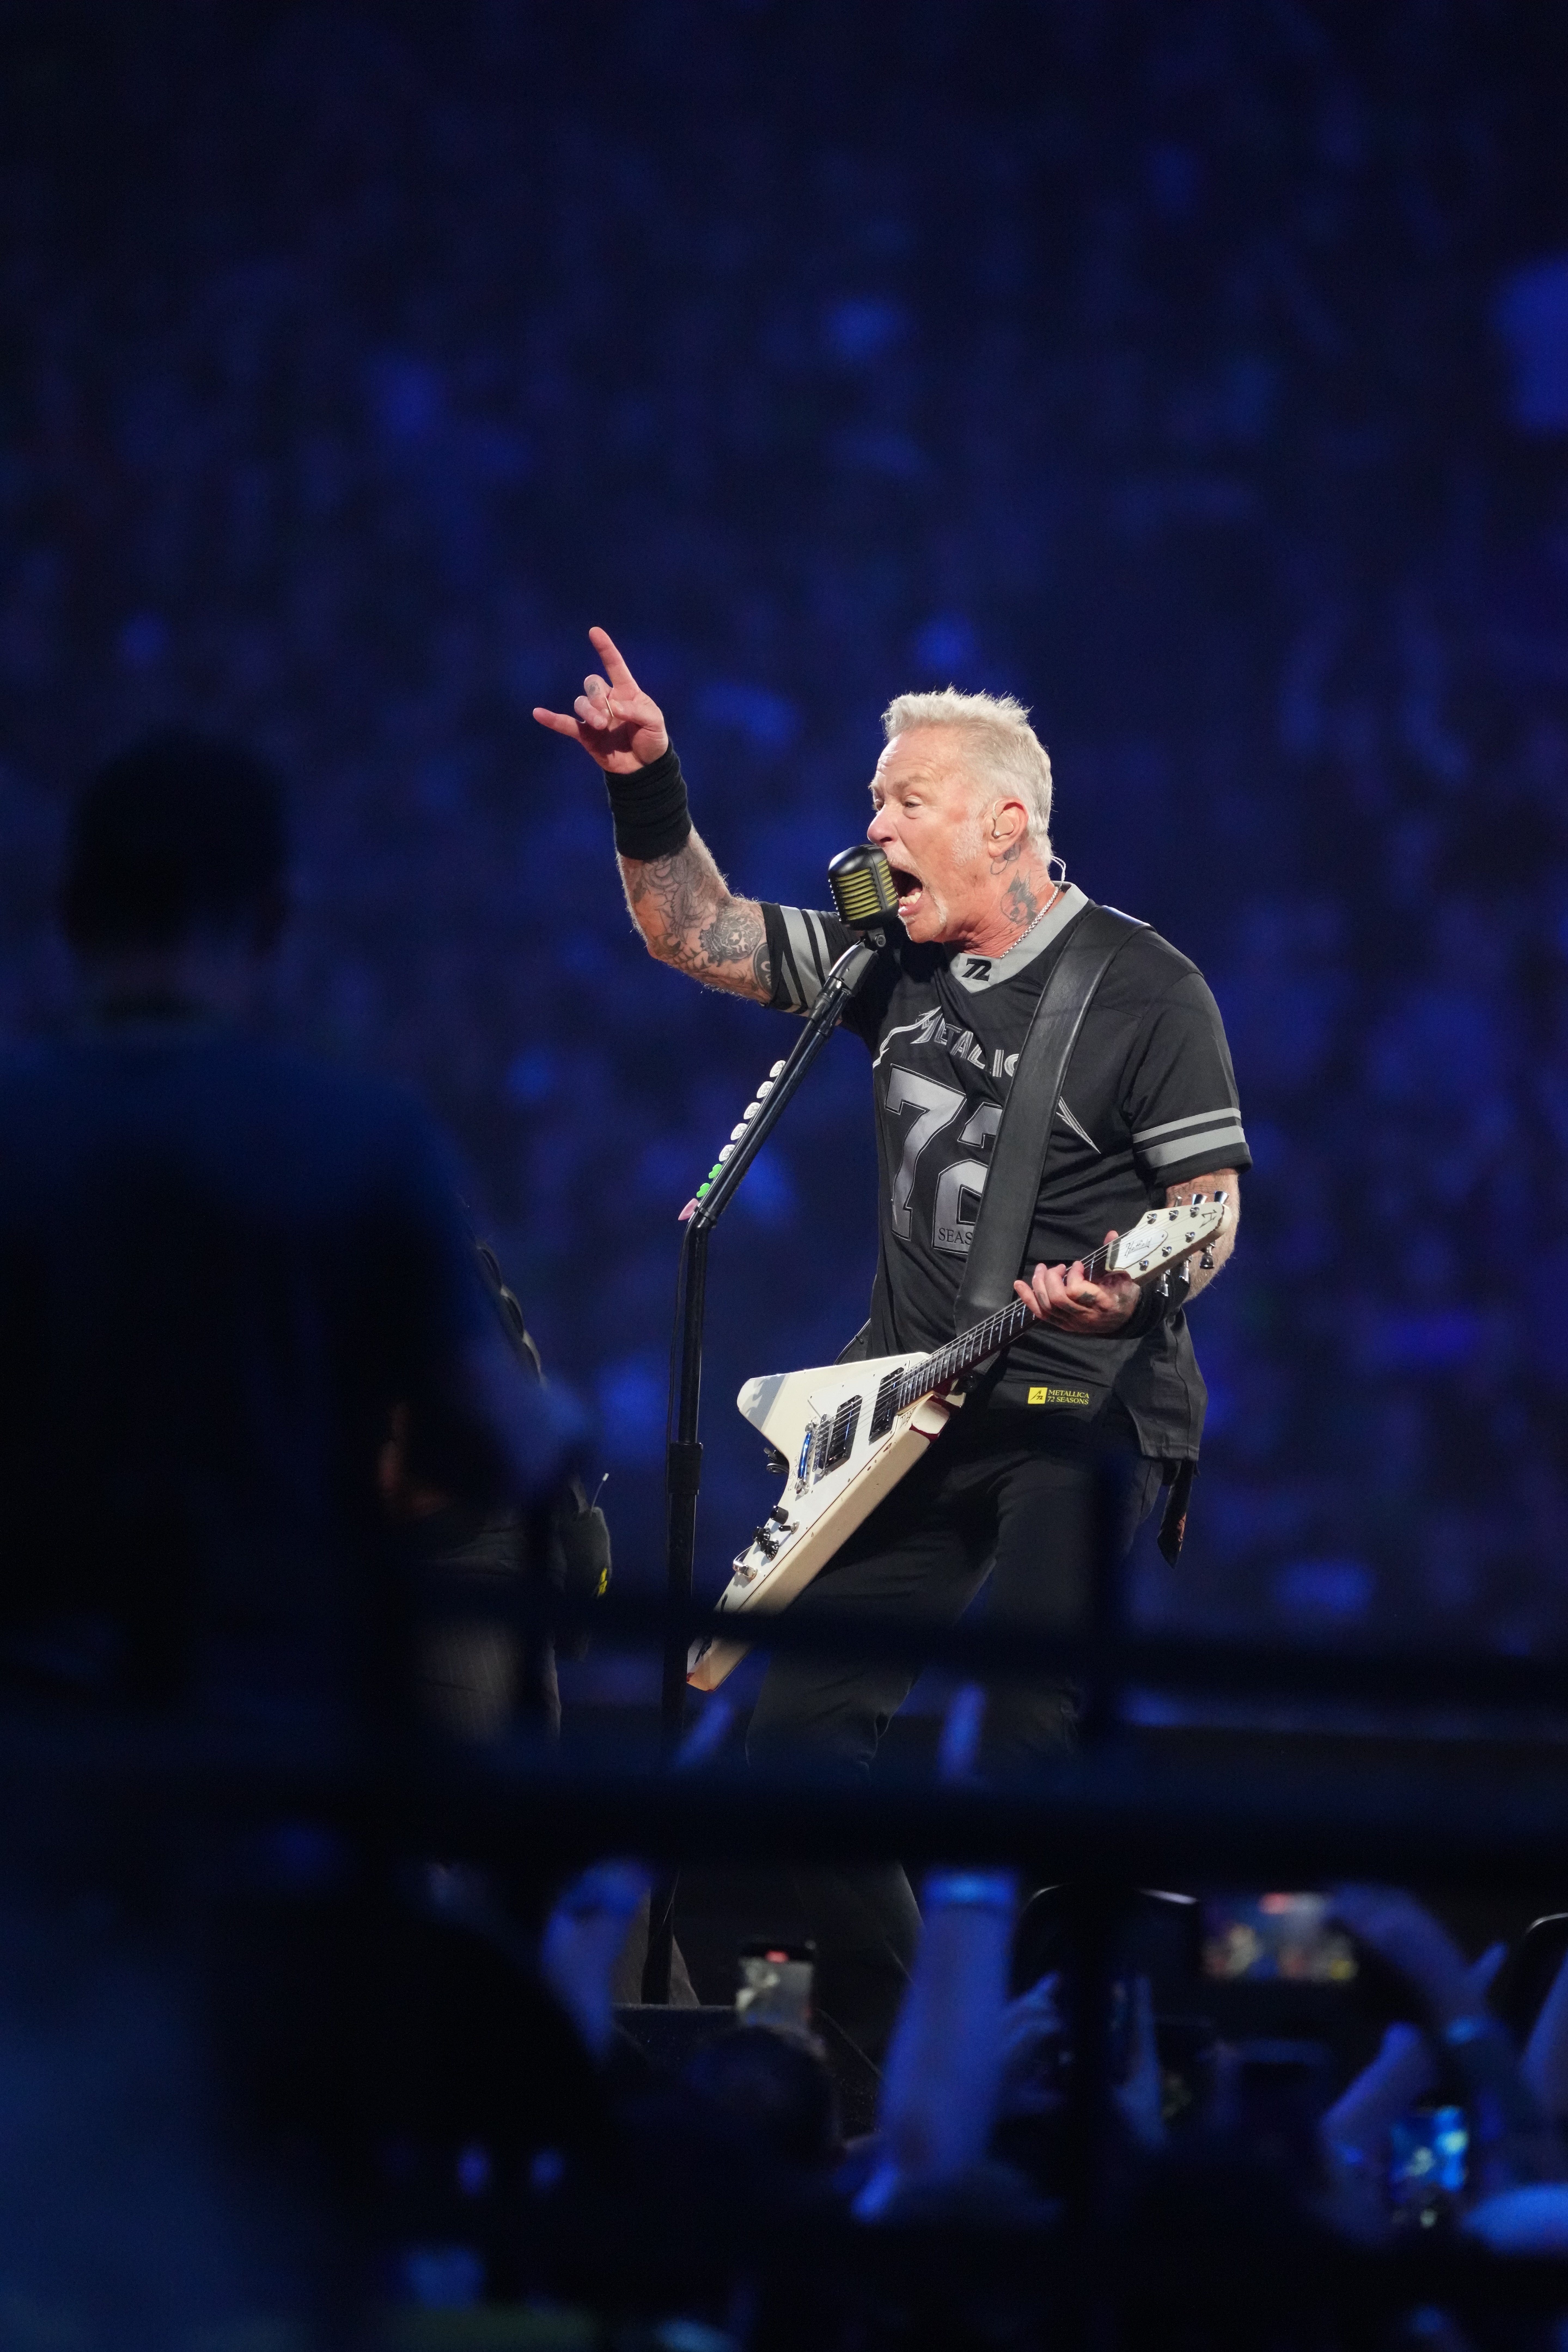 After the rain, a sound deluge on Metallica's second night at Gillette Stadium